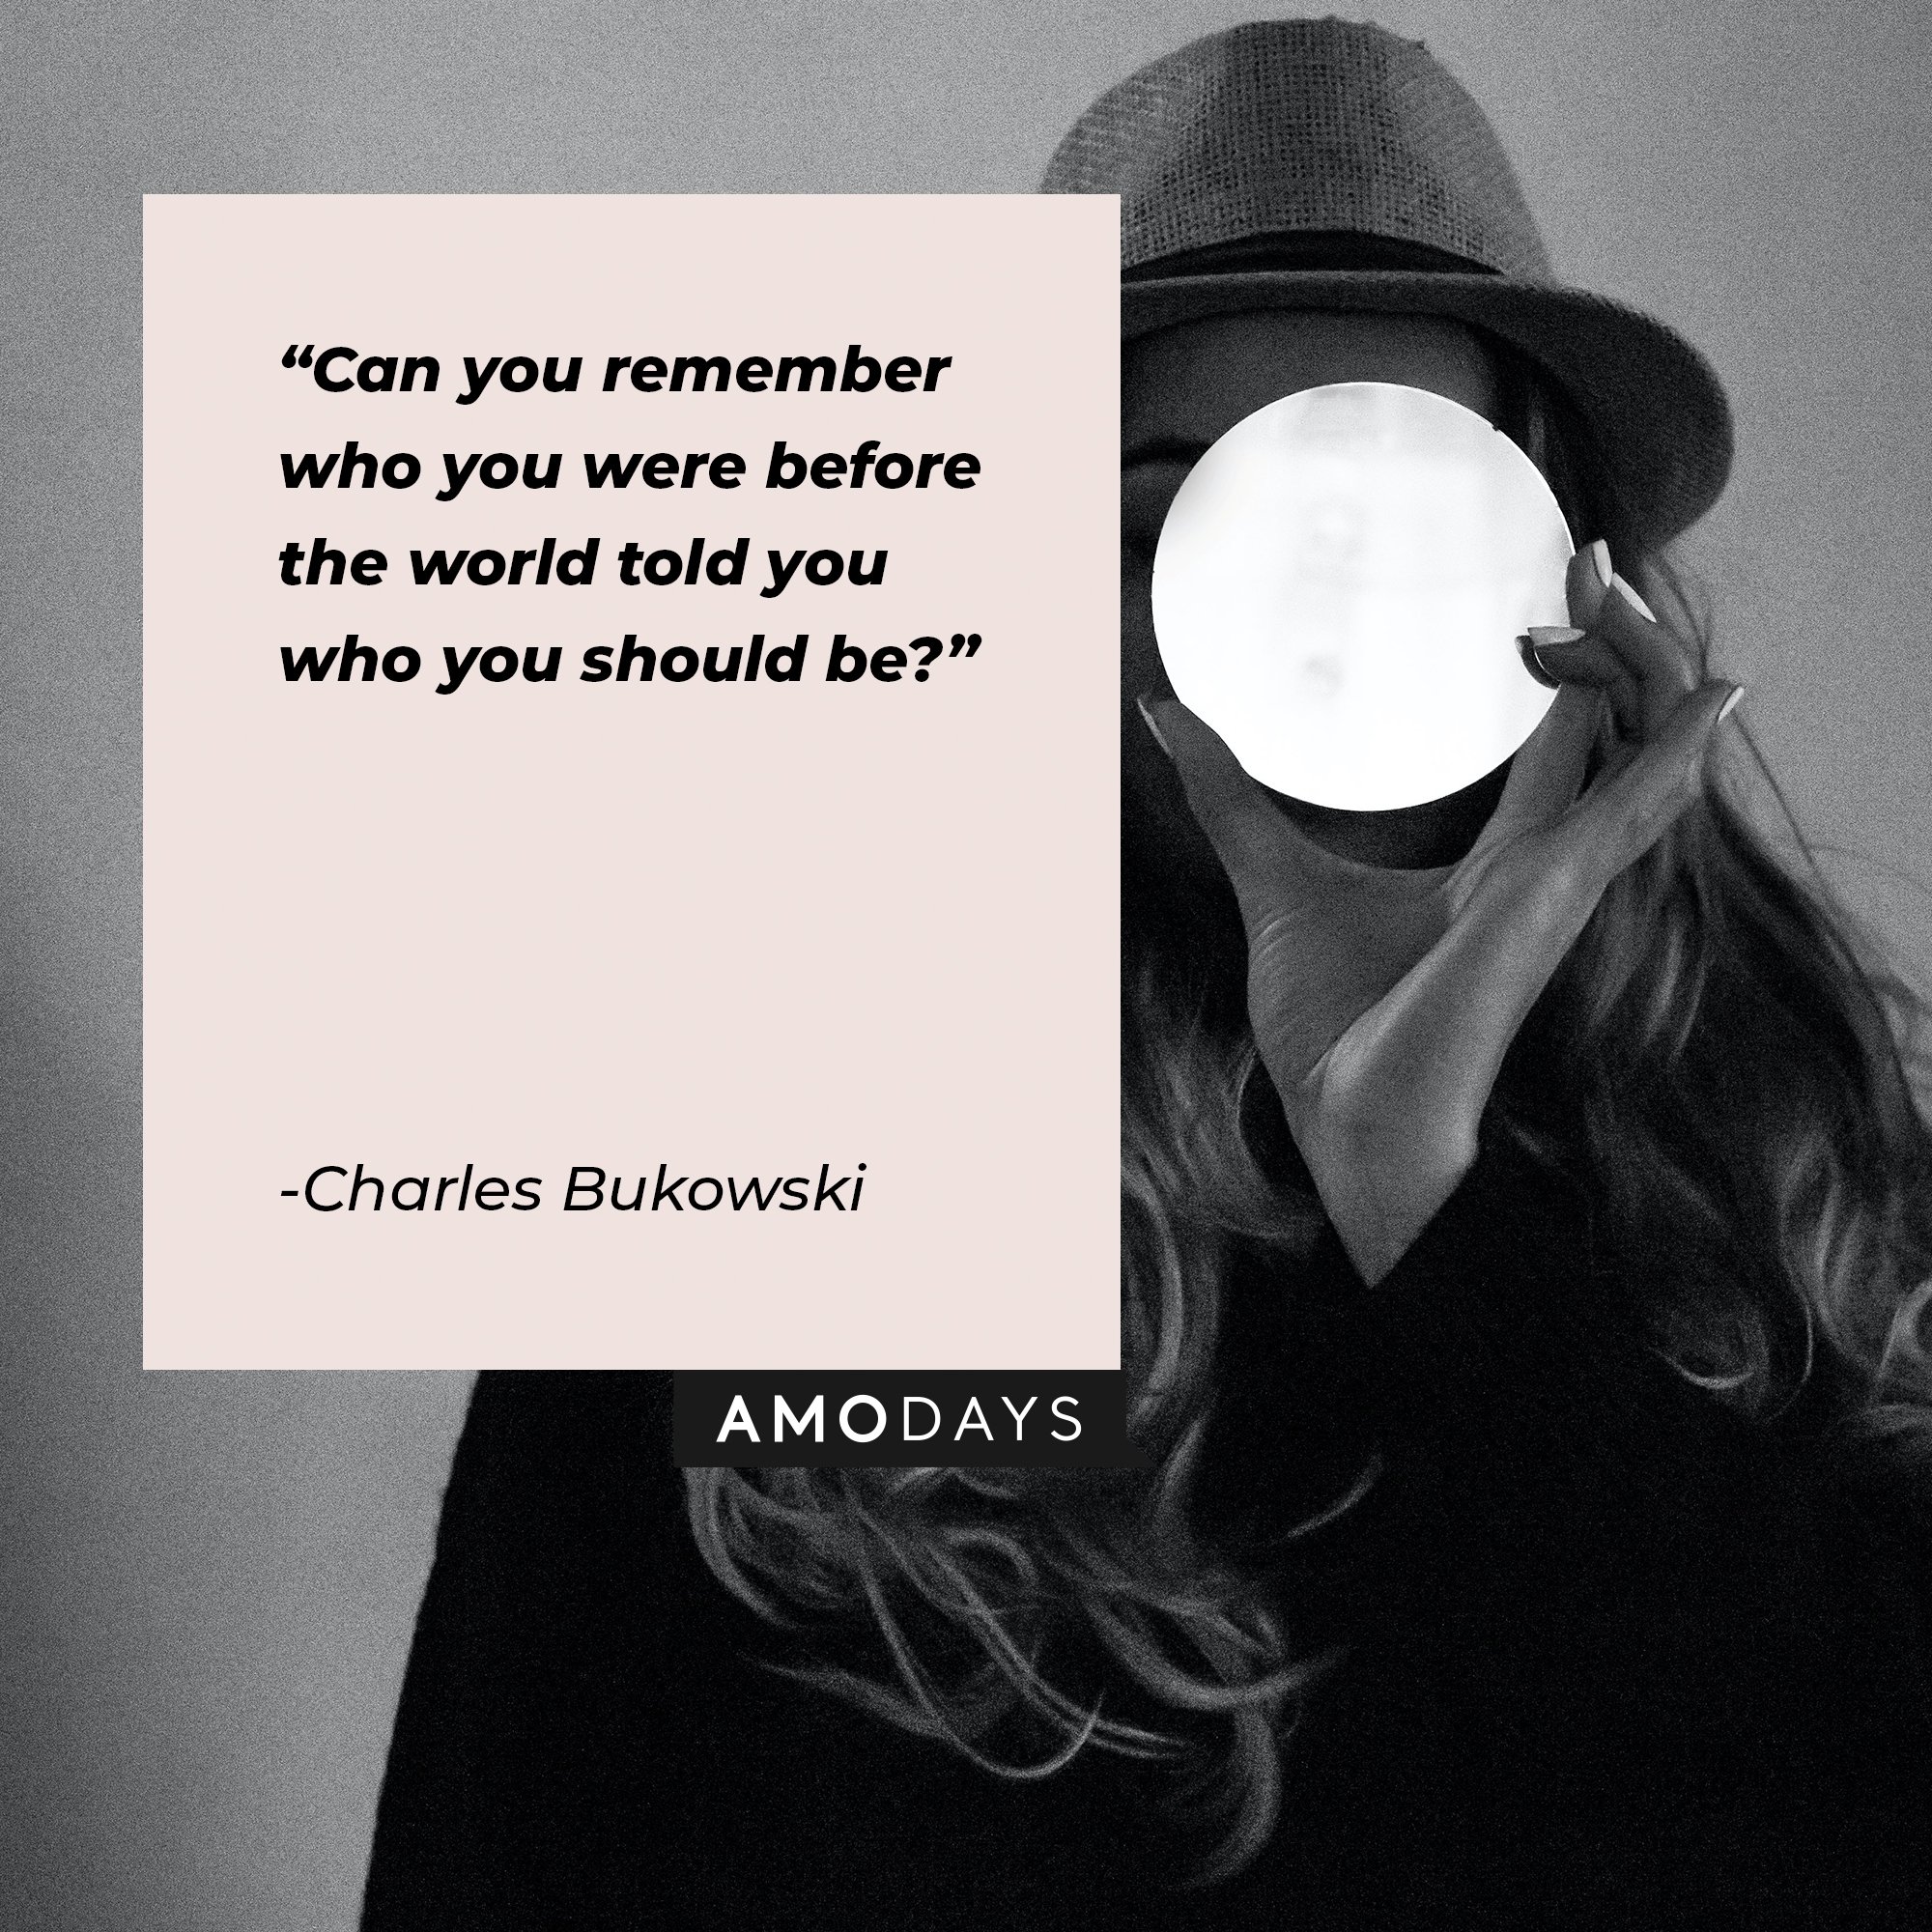 Charles Bukowskis quote: "Can you remember who you were before the world told you who you should be?" | Image: AmoDays